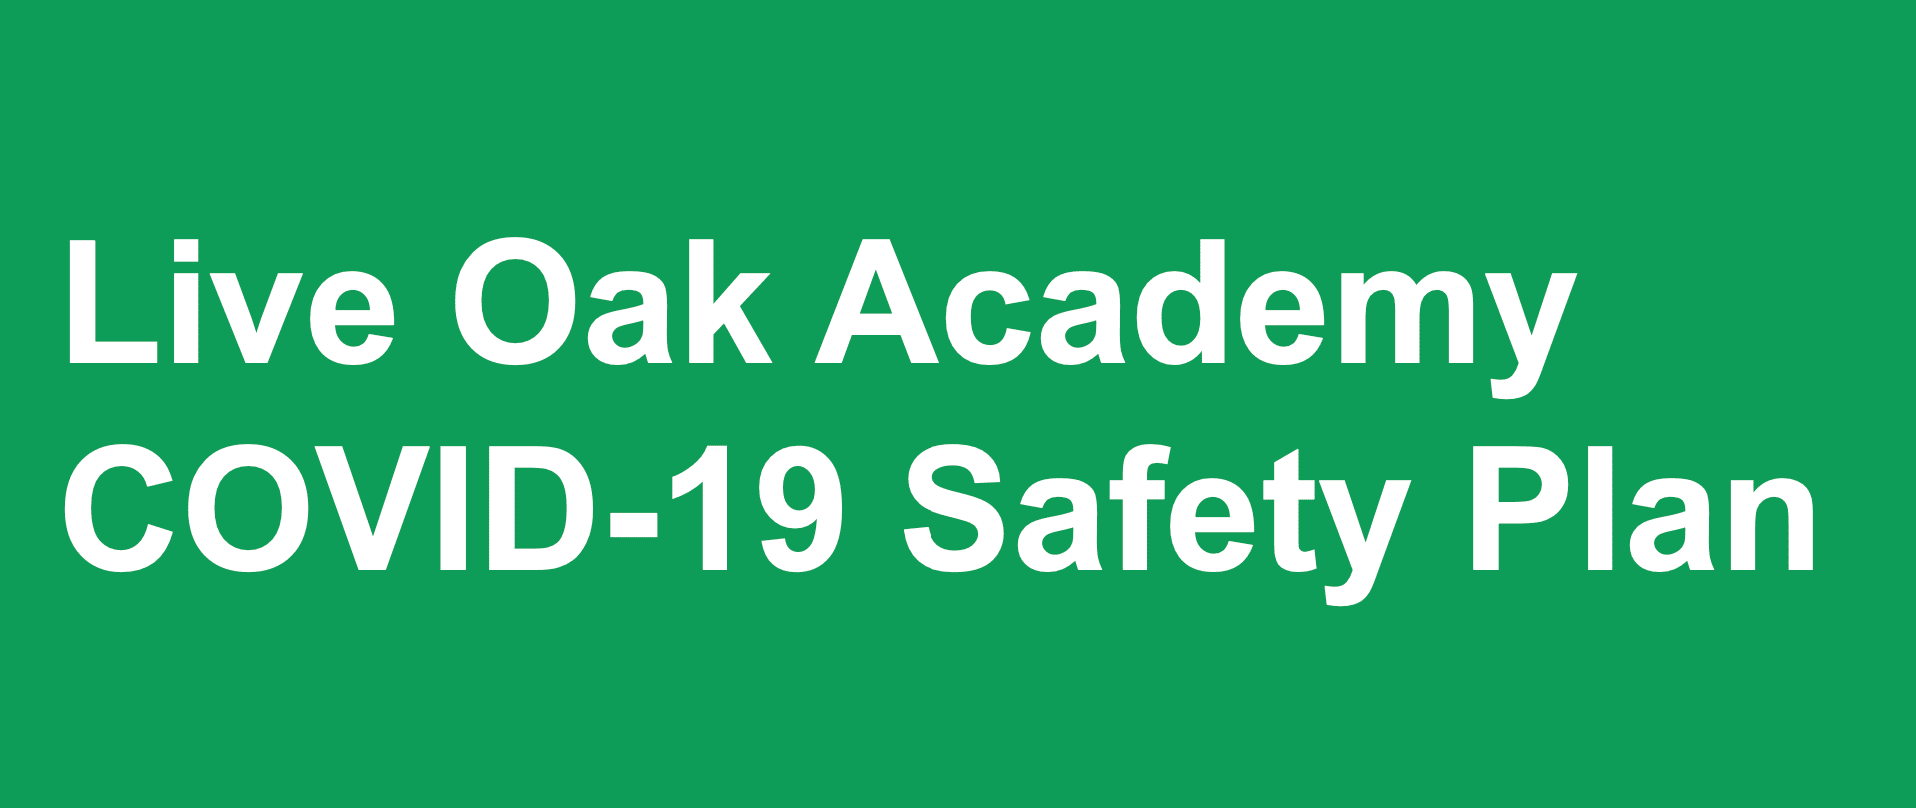 Live Oak Academy reopening Safety Plan